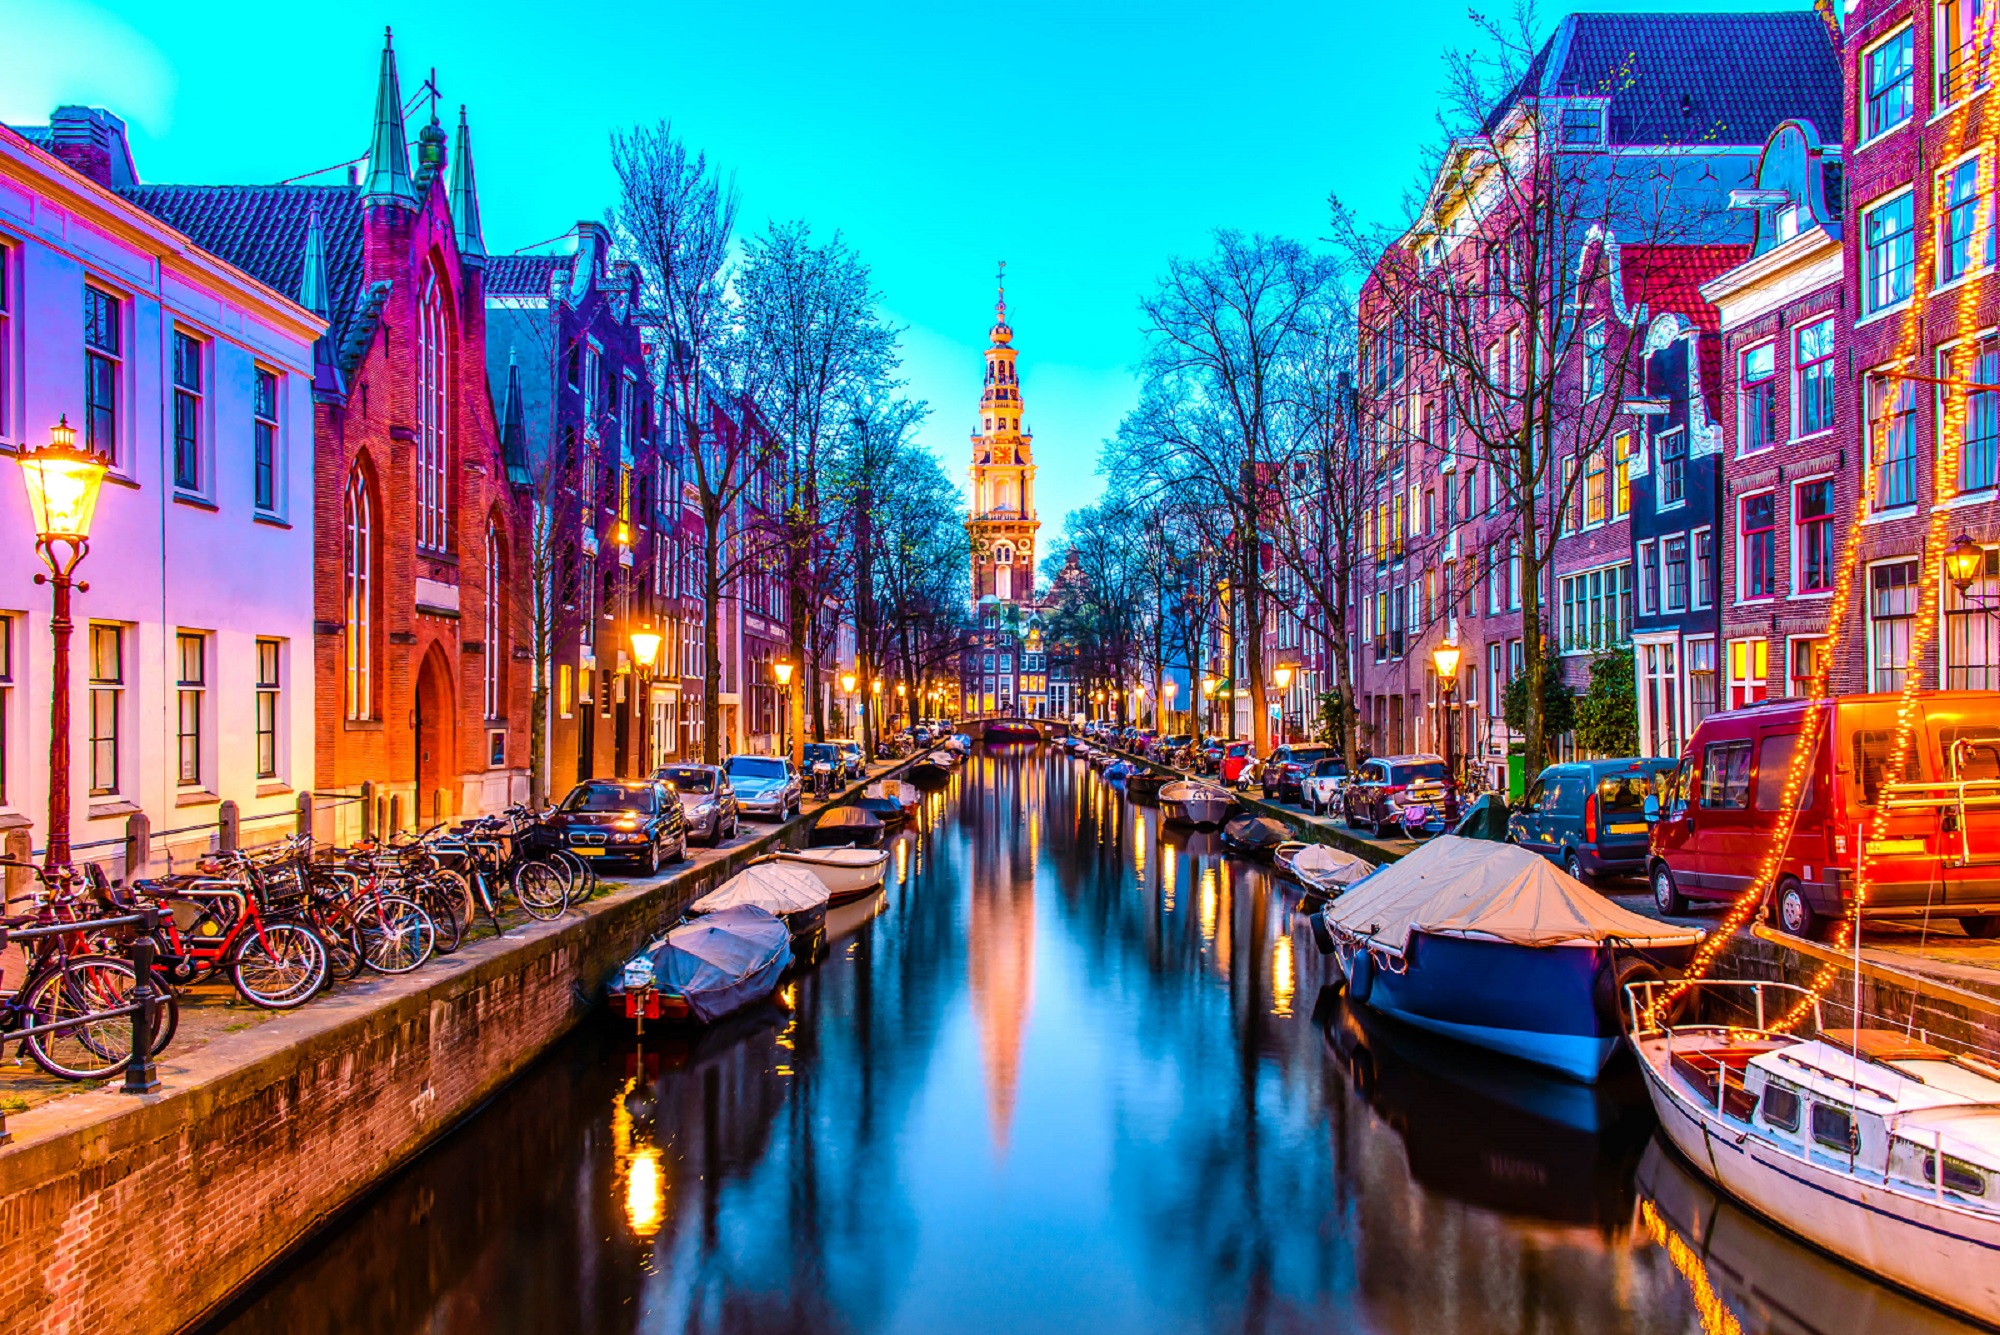 Amsterdam travel guide for first-time visitors